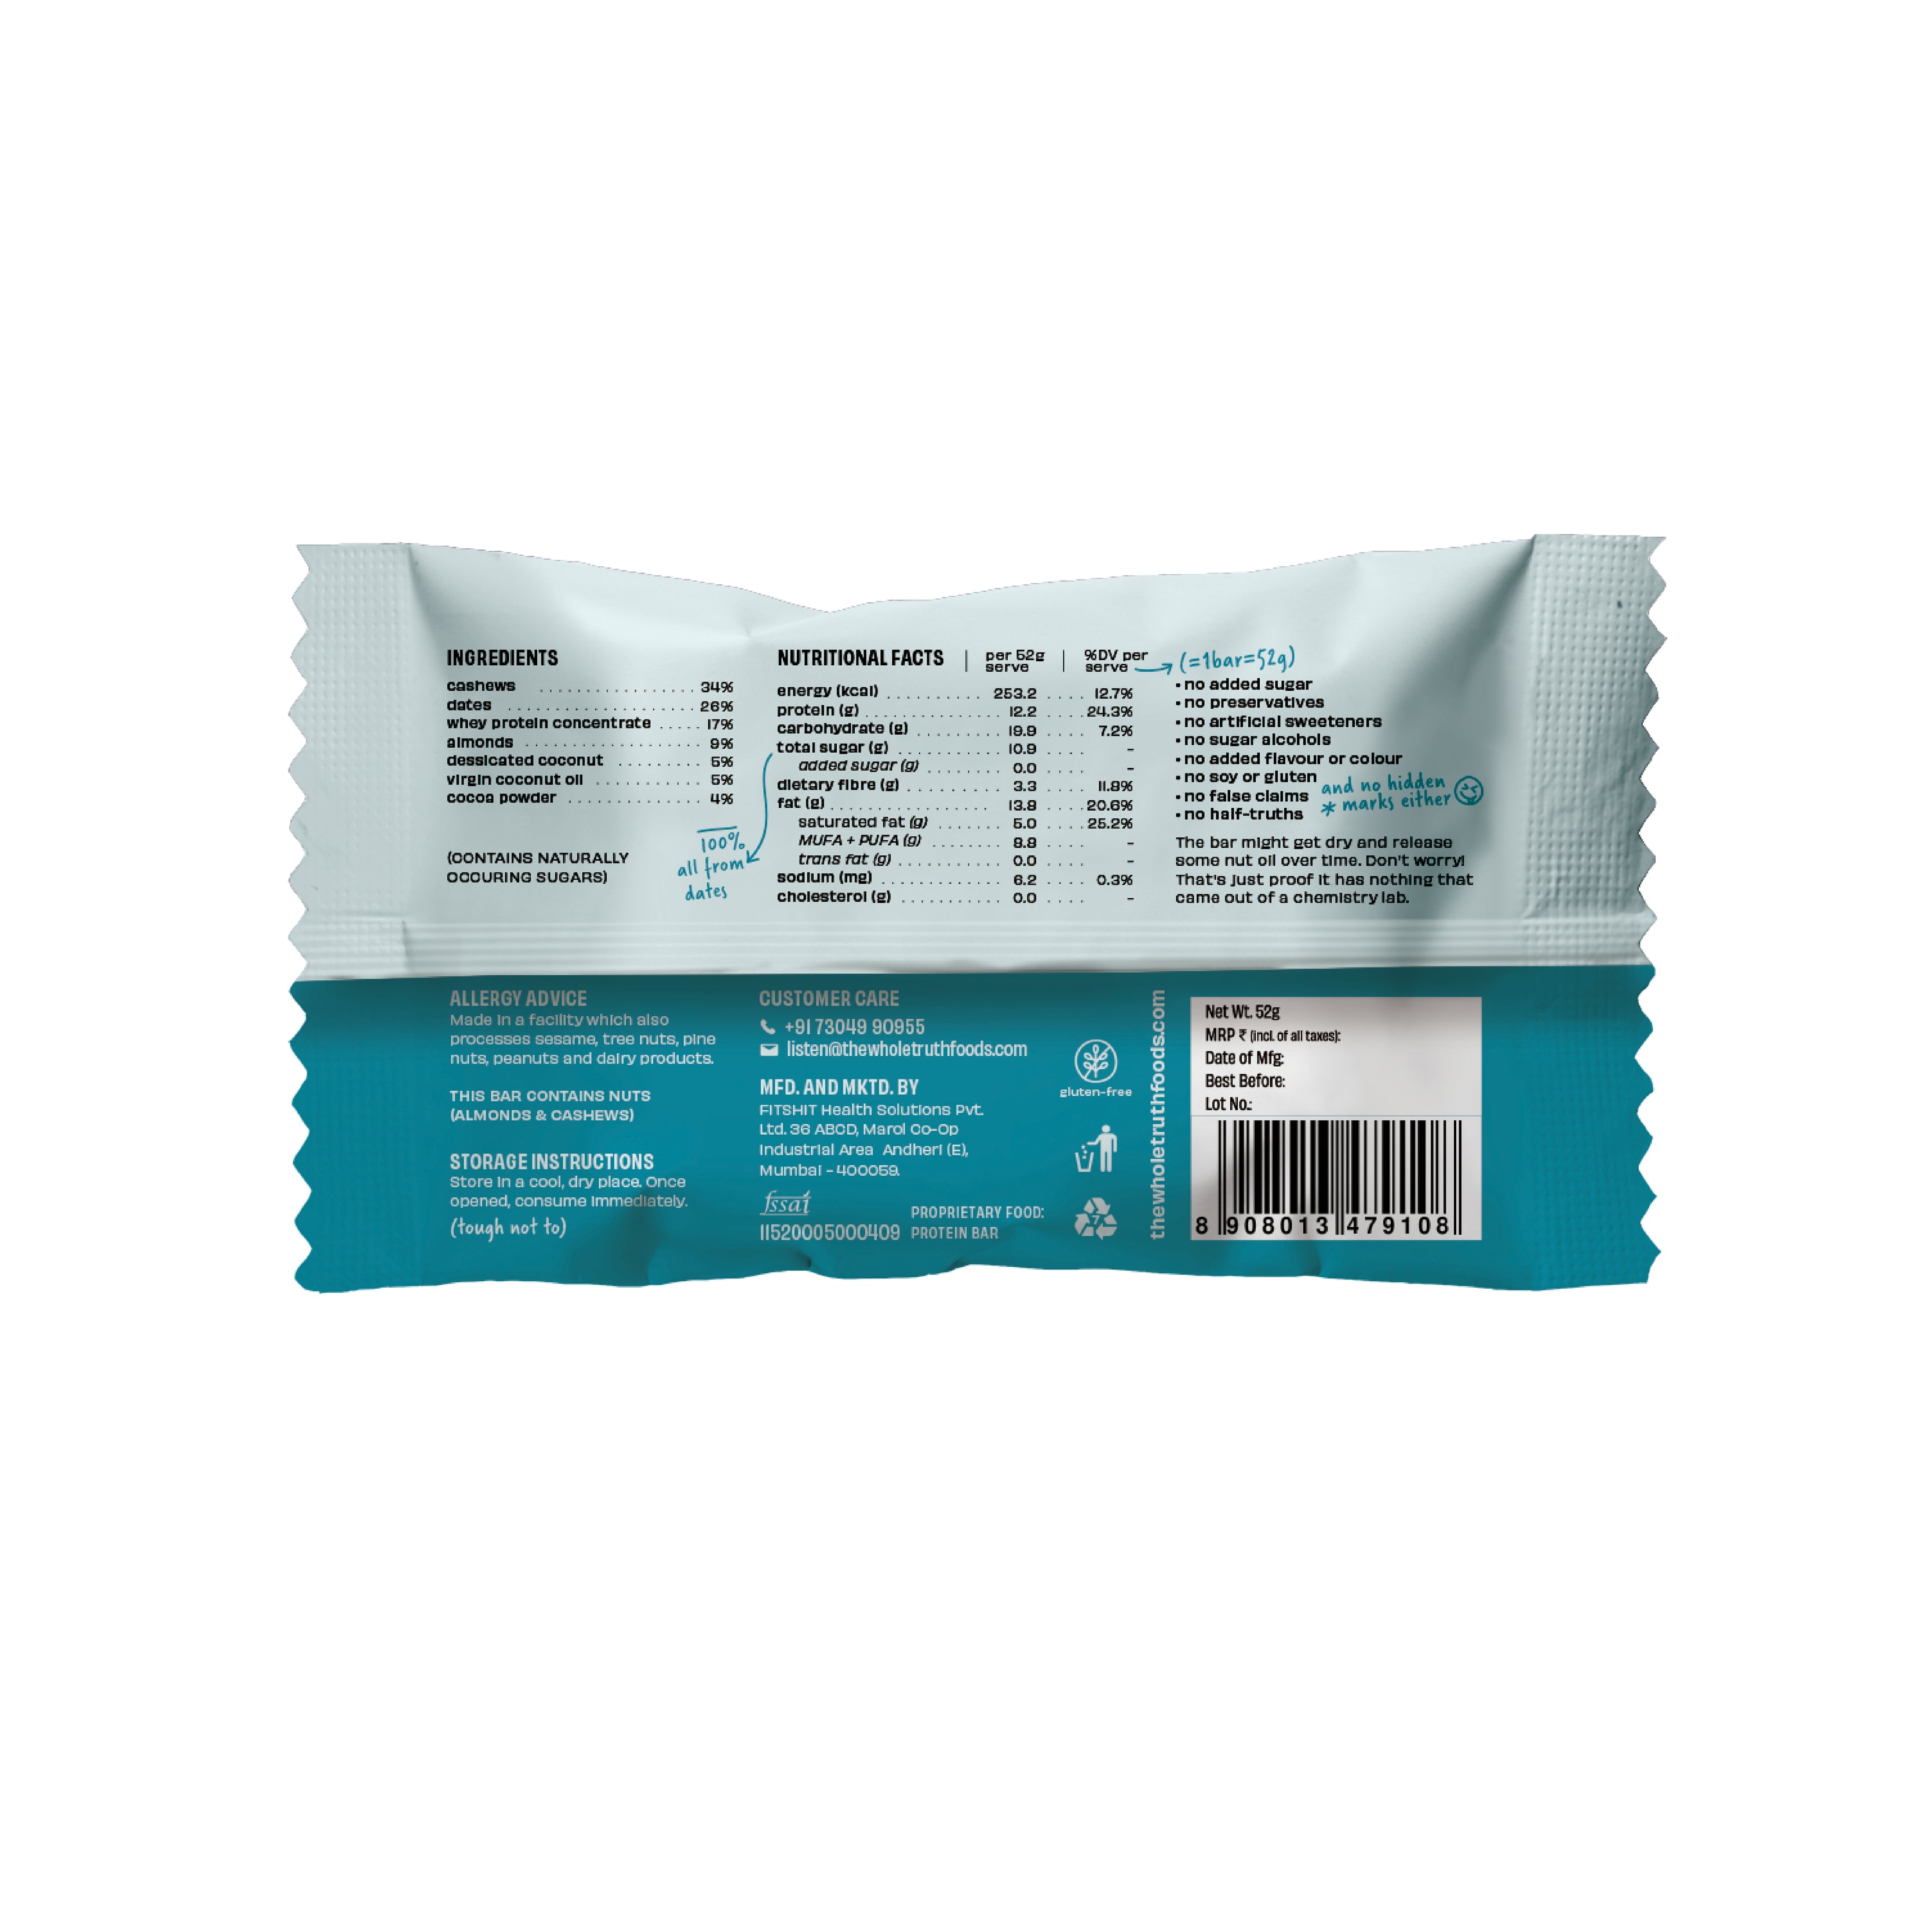 The Whole Truth - Protein Bars - Coconut Cocoa - Pack of 6 (6 x 52g) - No Added Sugar - All Natural